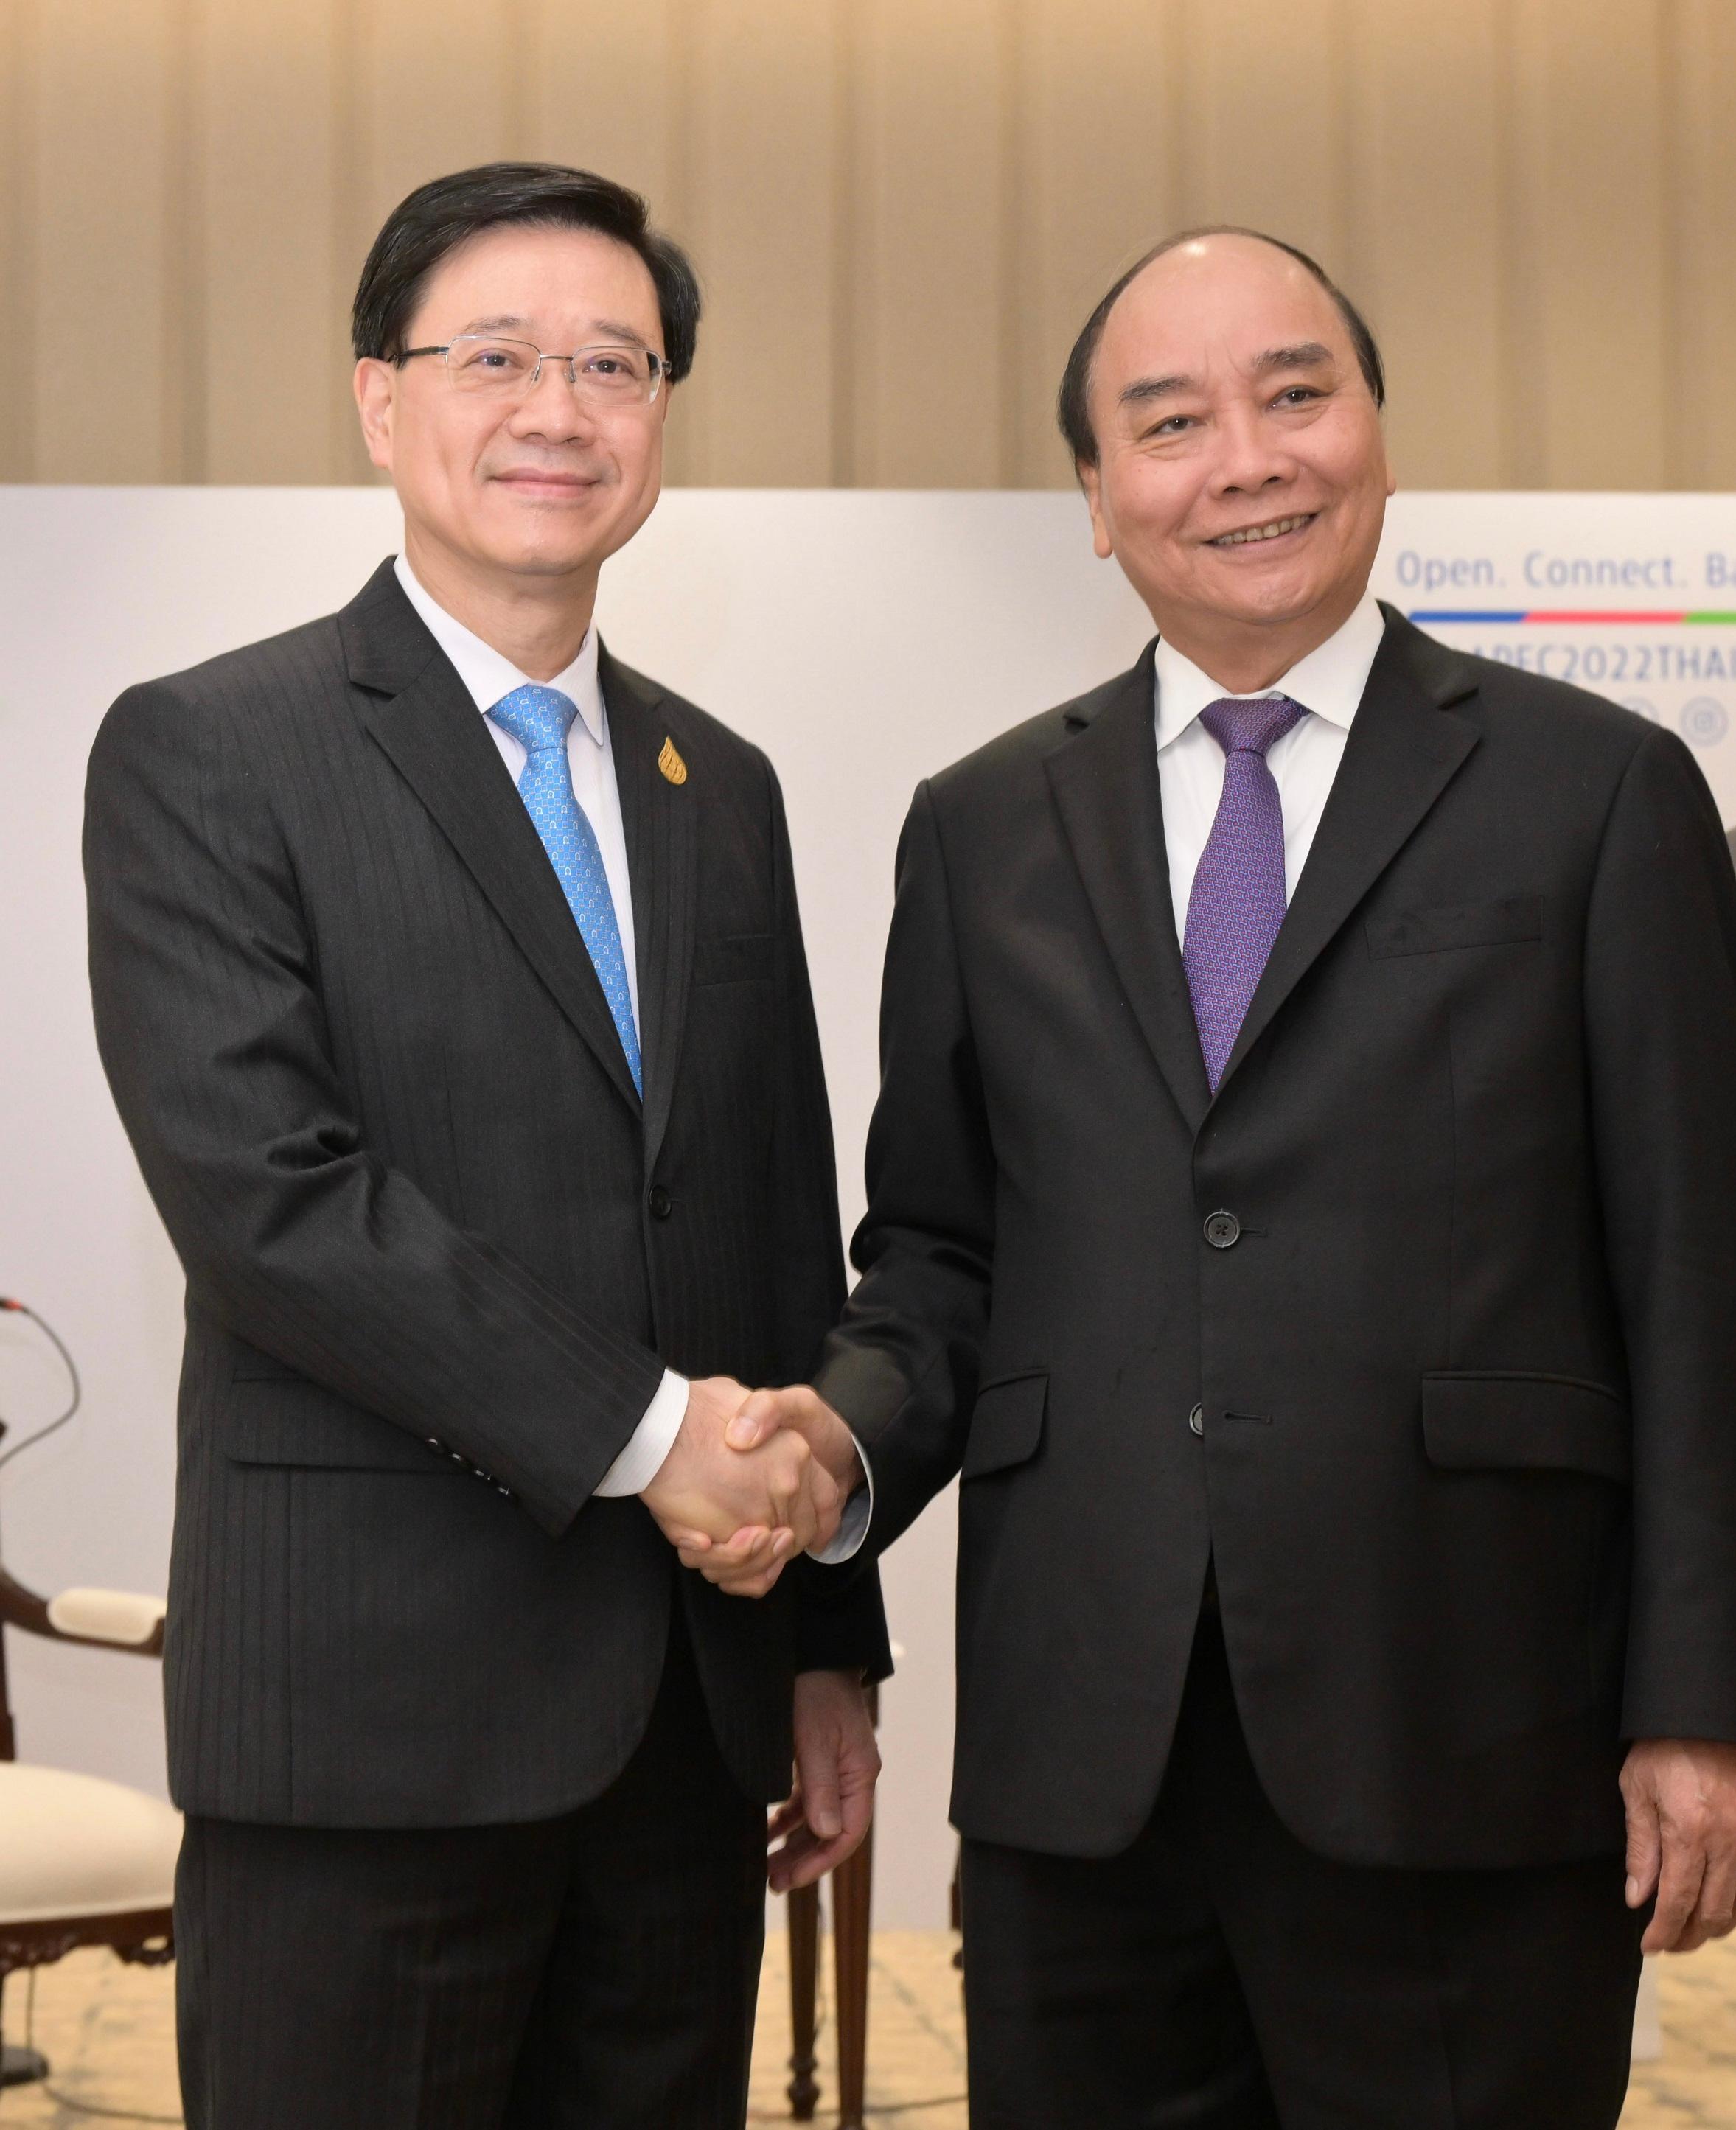 The Chief Executive, Mr John Lee (left), has a bilateral meeting with the President of the Socialist Republic of Vietnam, Mr Nguyen Xuan Phuc (right), while attending the 29th Asia-Pacific Economic Cooperation Economic Leaders' Meeting in Bangkok, Thailand, today (November 19).